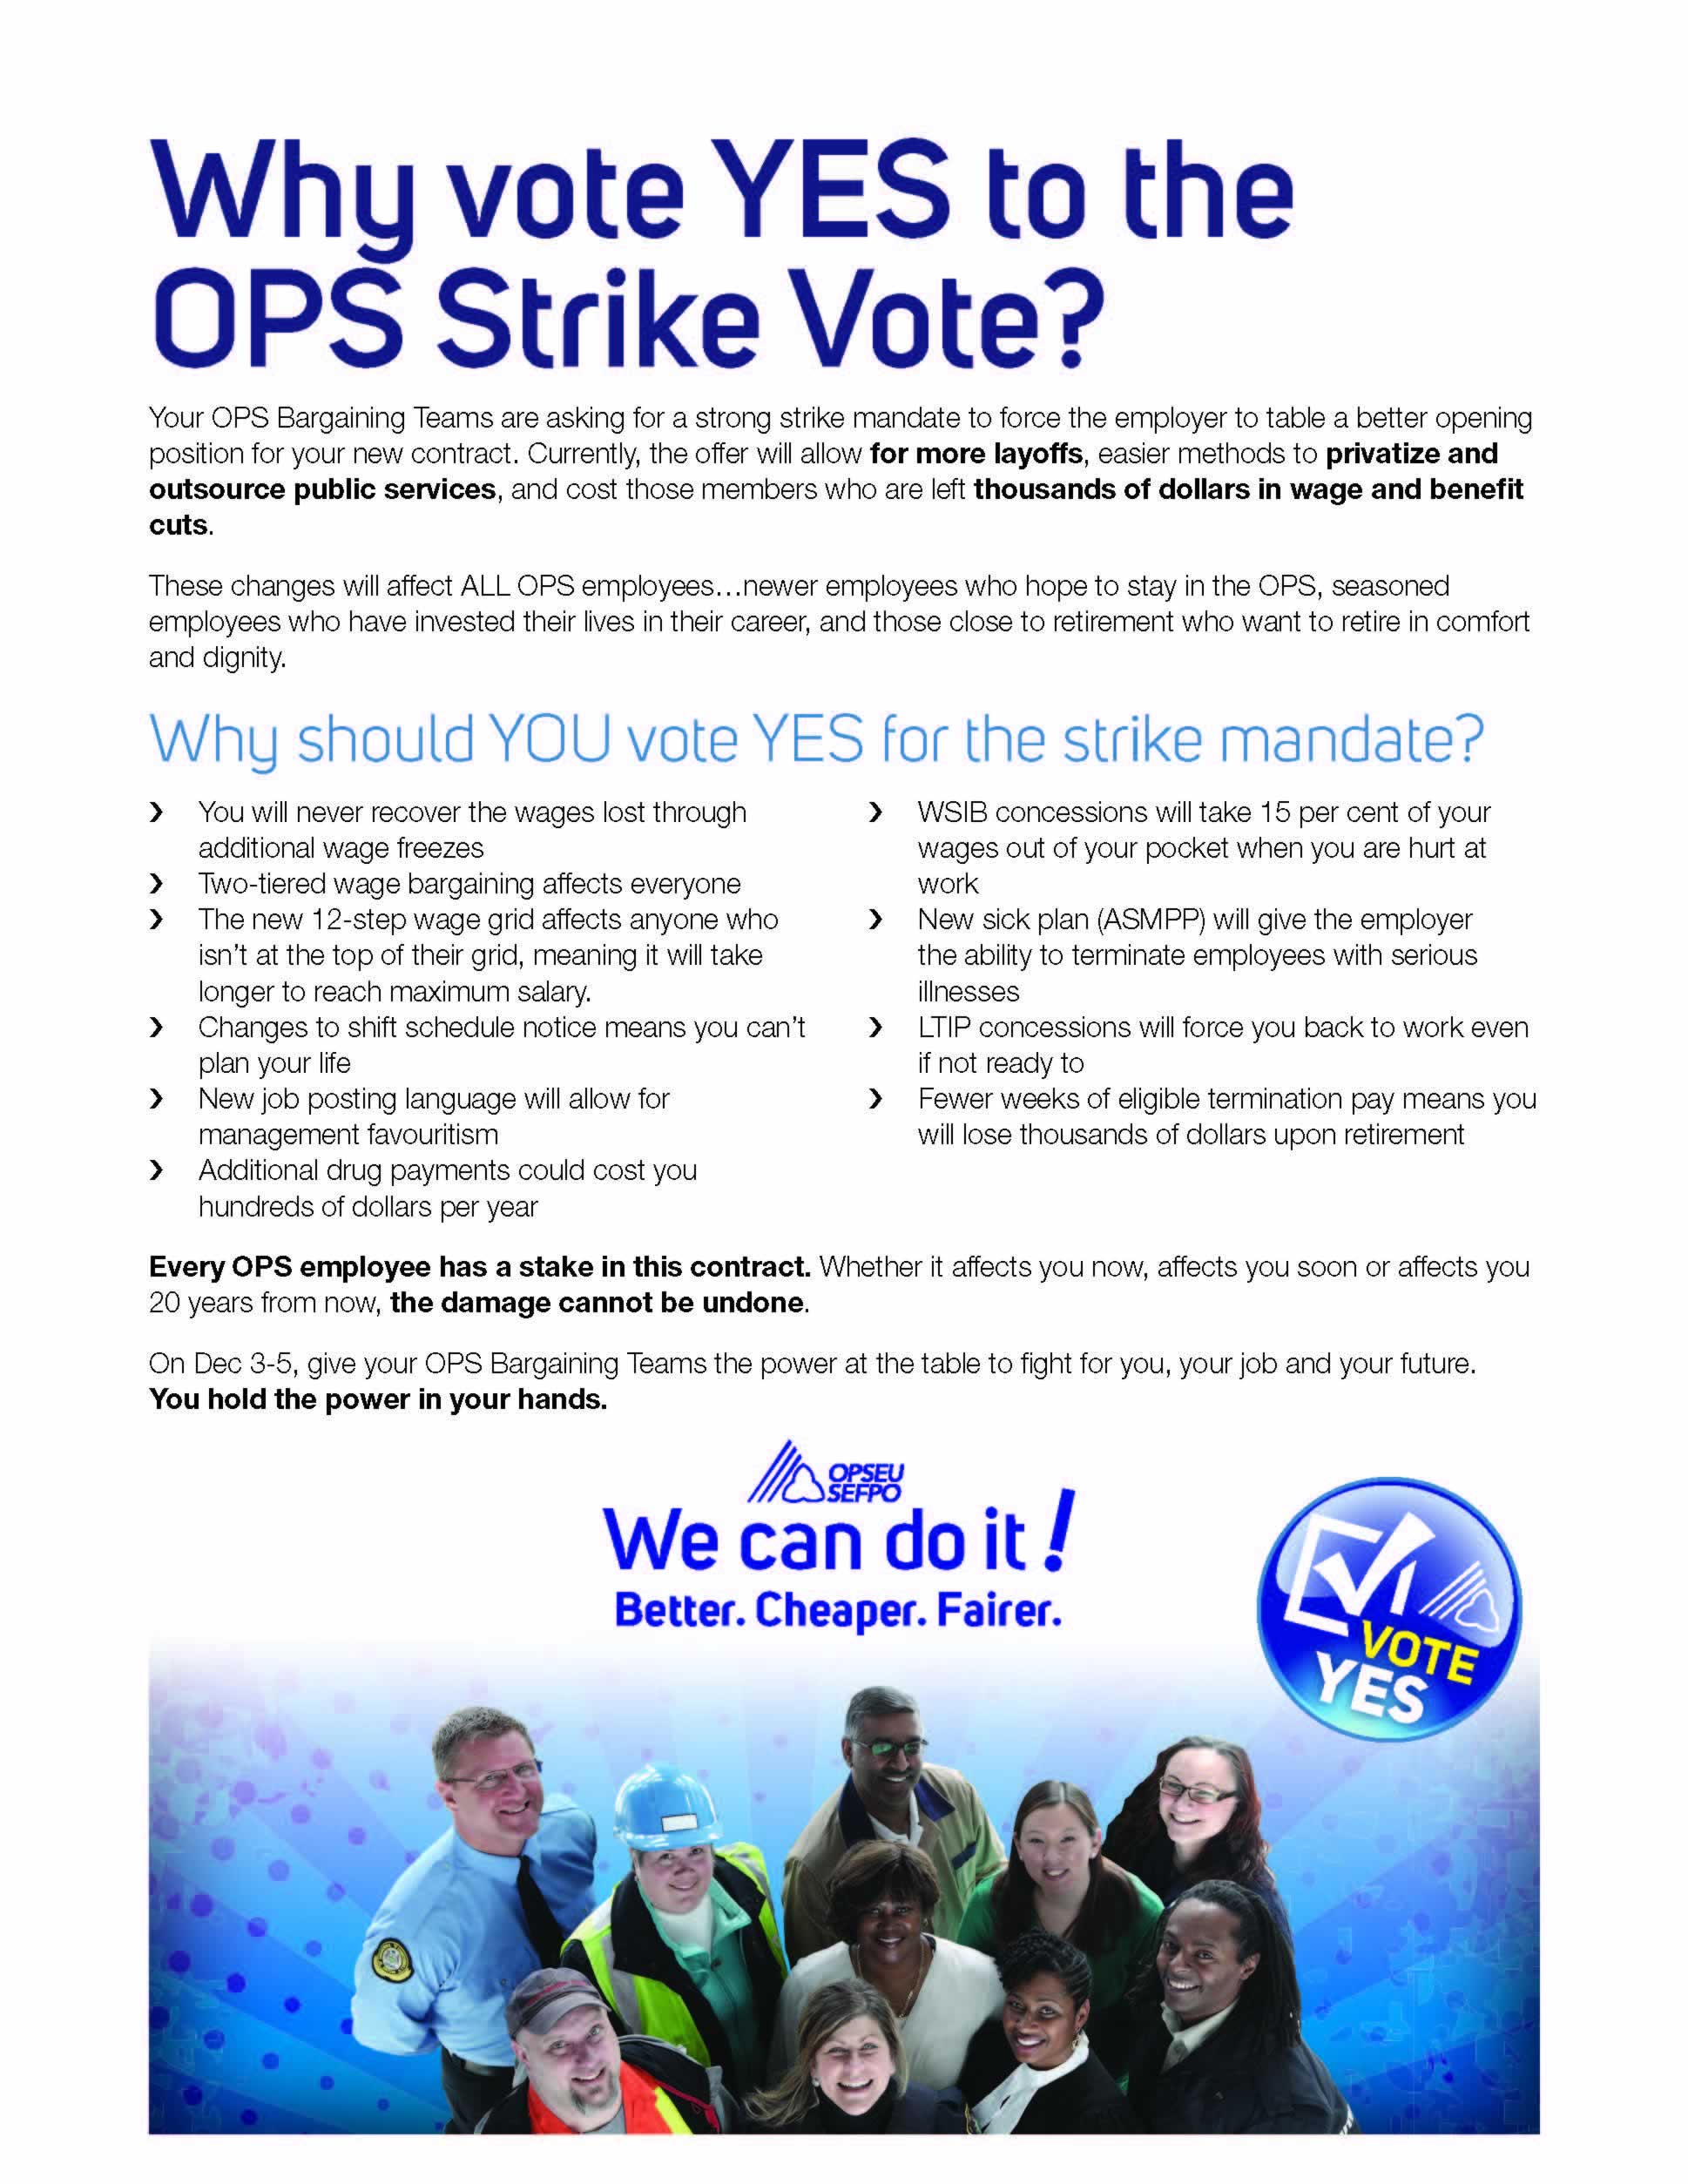 OPS flyer image. Why vote YES to the OPS strike vote?